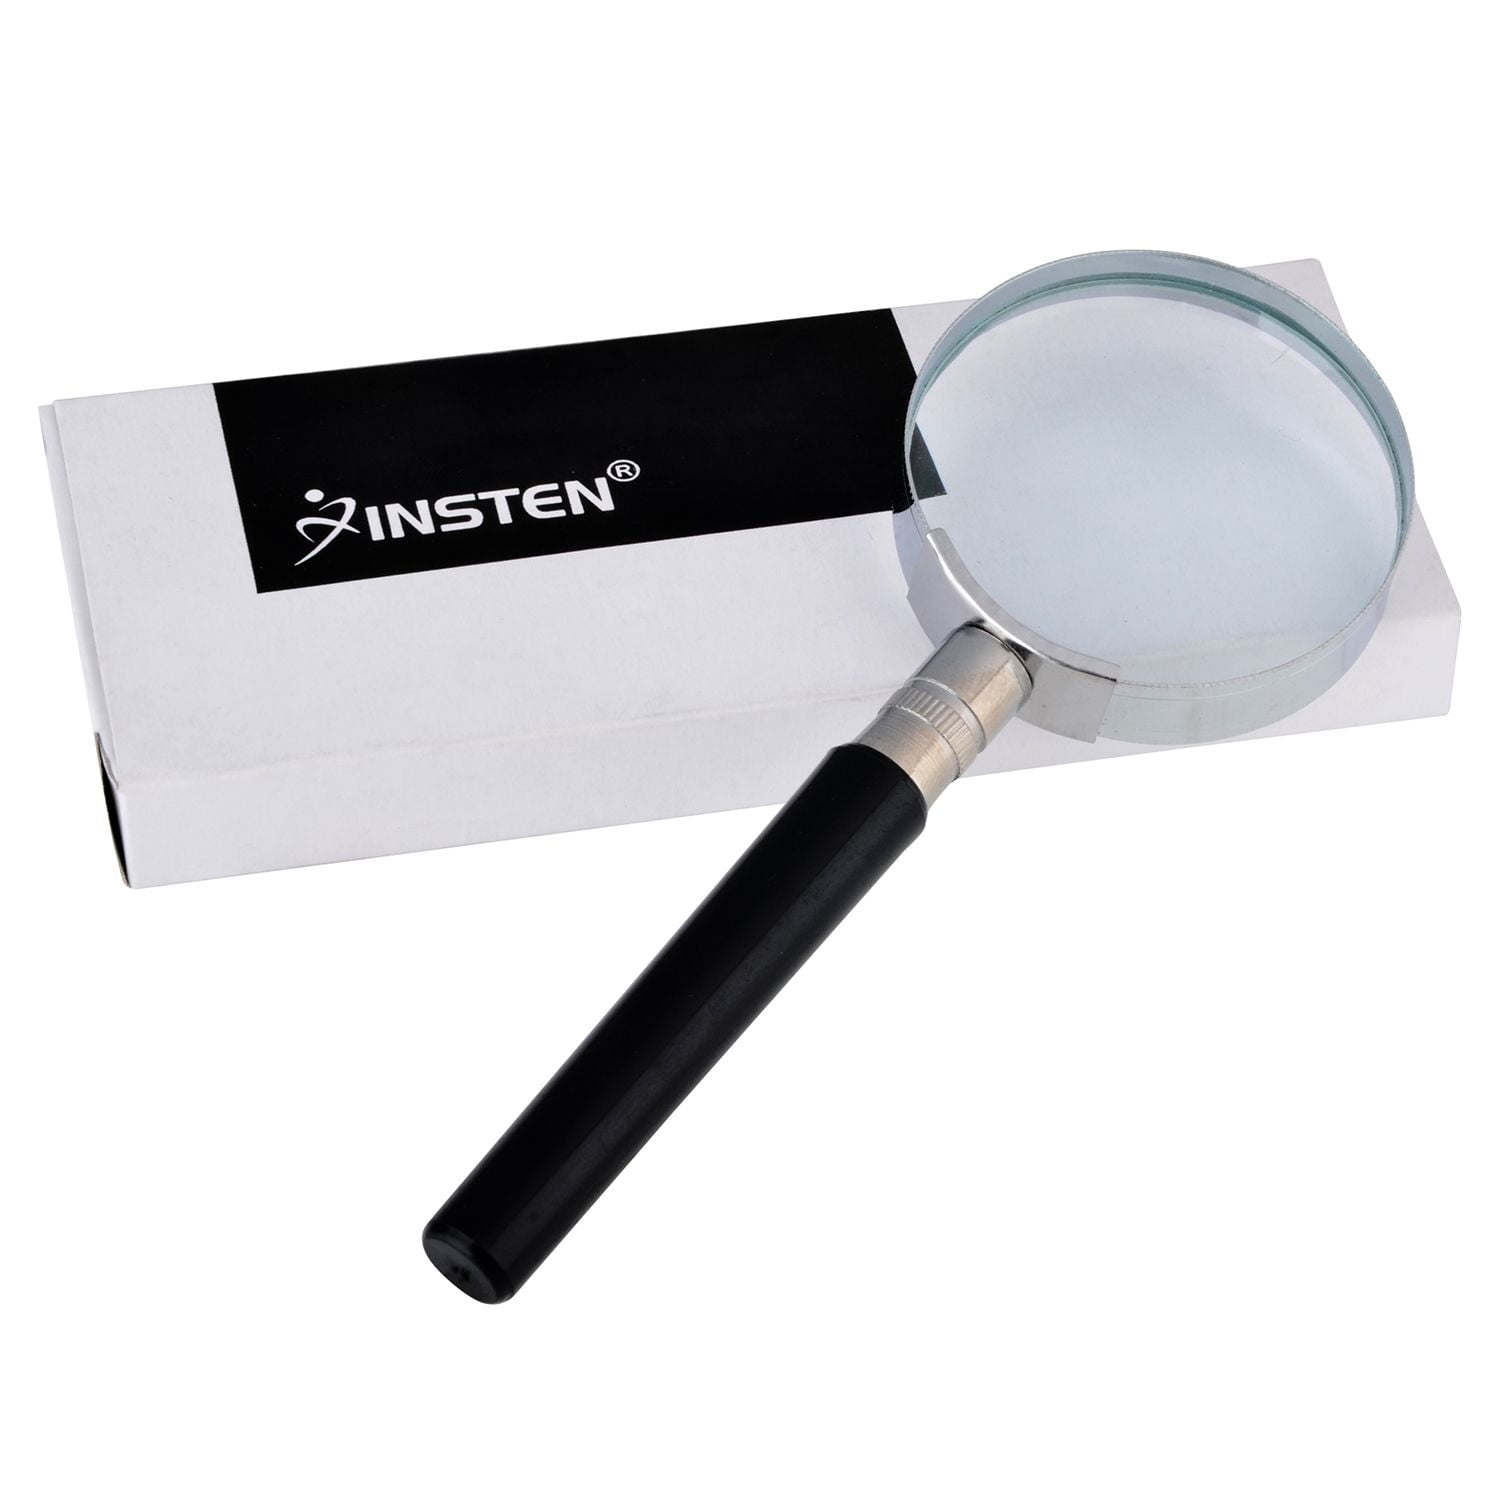 10x Handheld Magnifying Glass Portable Magnifier With Precision Tweezers  Loupe For Inspection Coins Stamps Hobbyists Crafts Maps - Magnifiers -  AliExpress